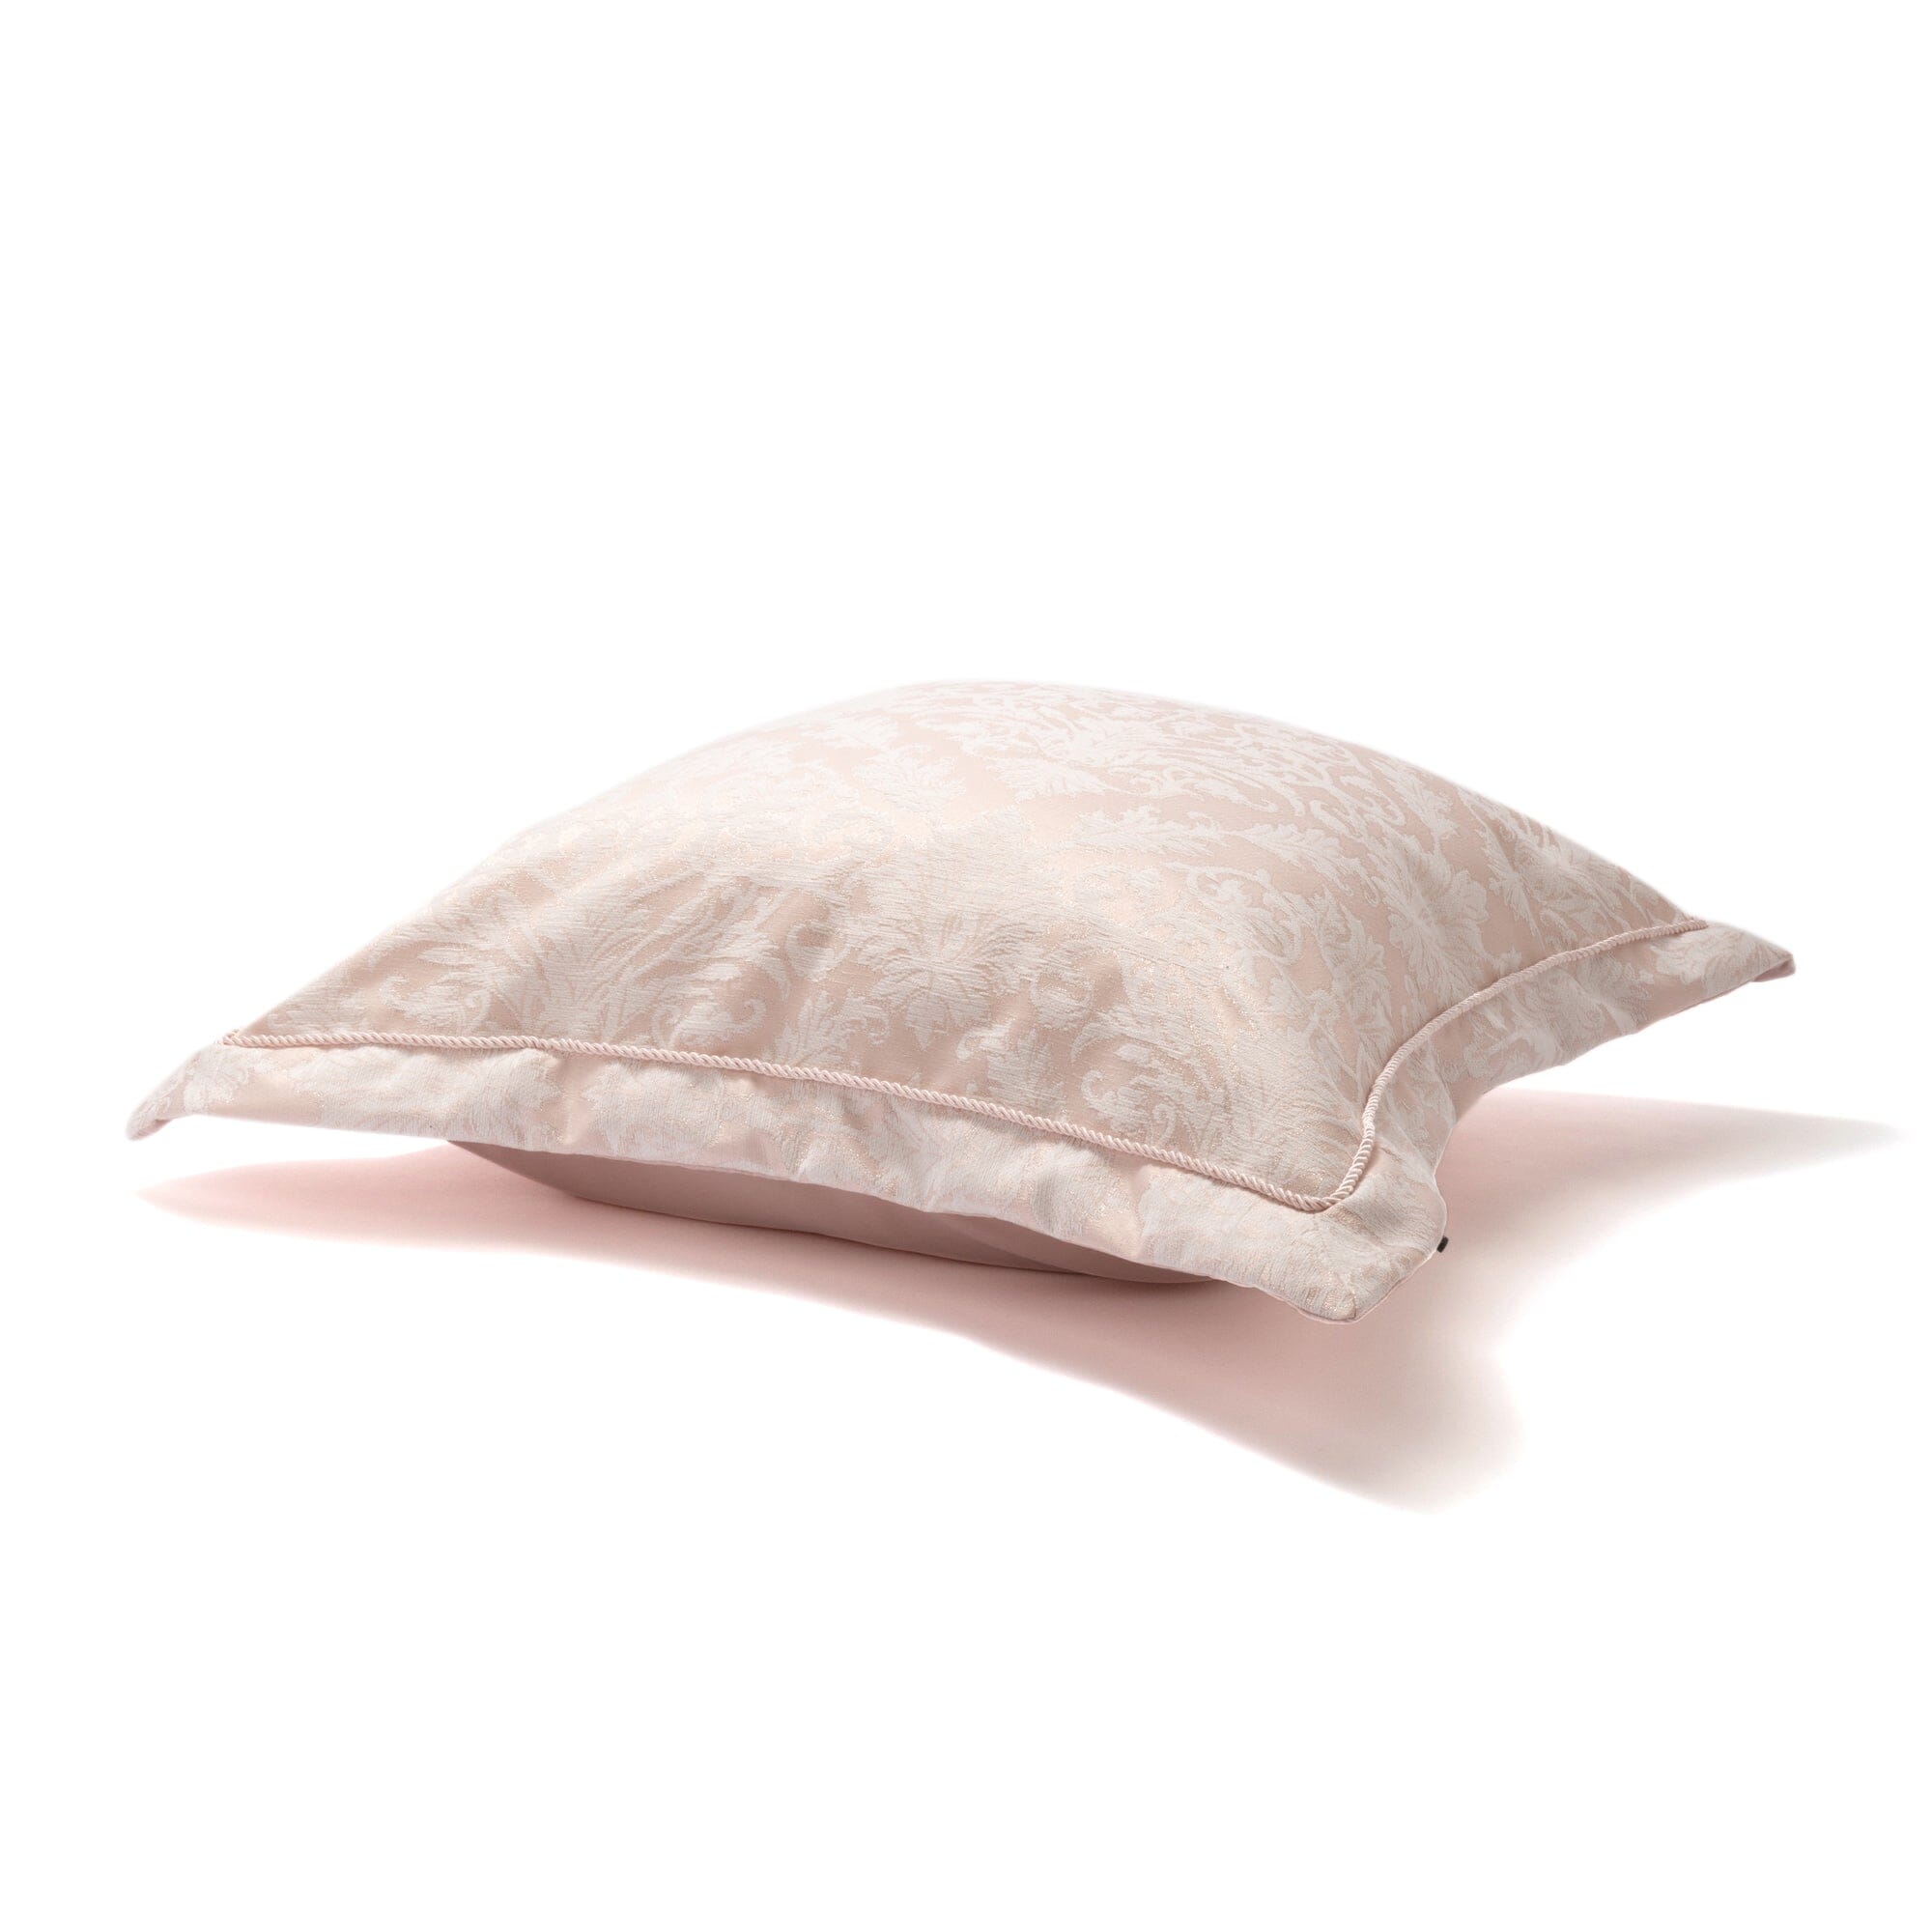 Lublesse Cushion Cover 600 x 600 Pink